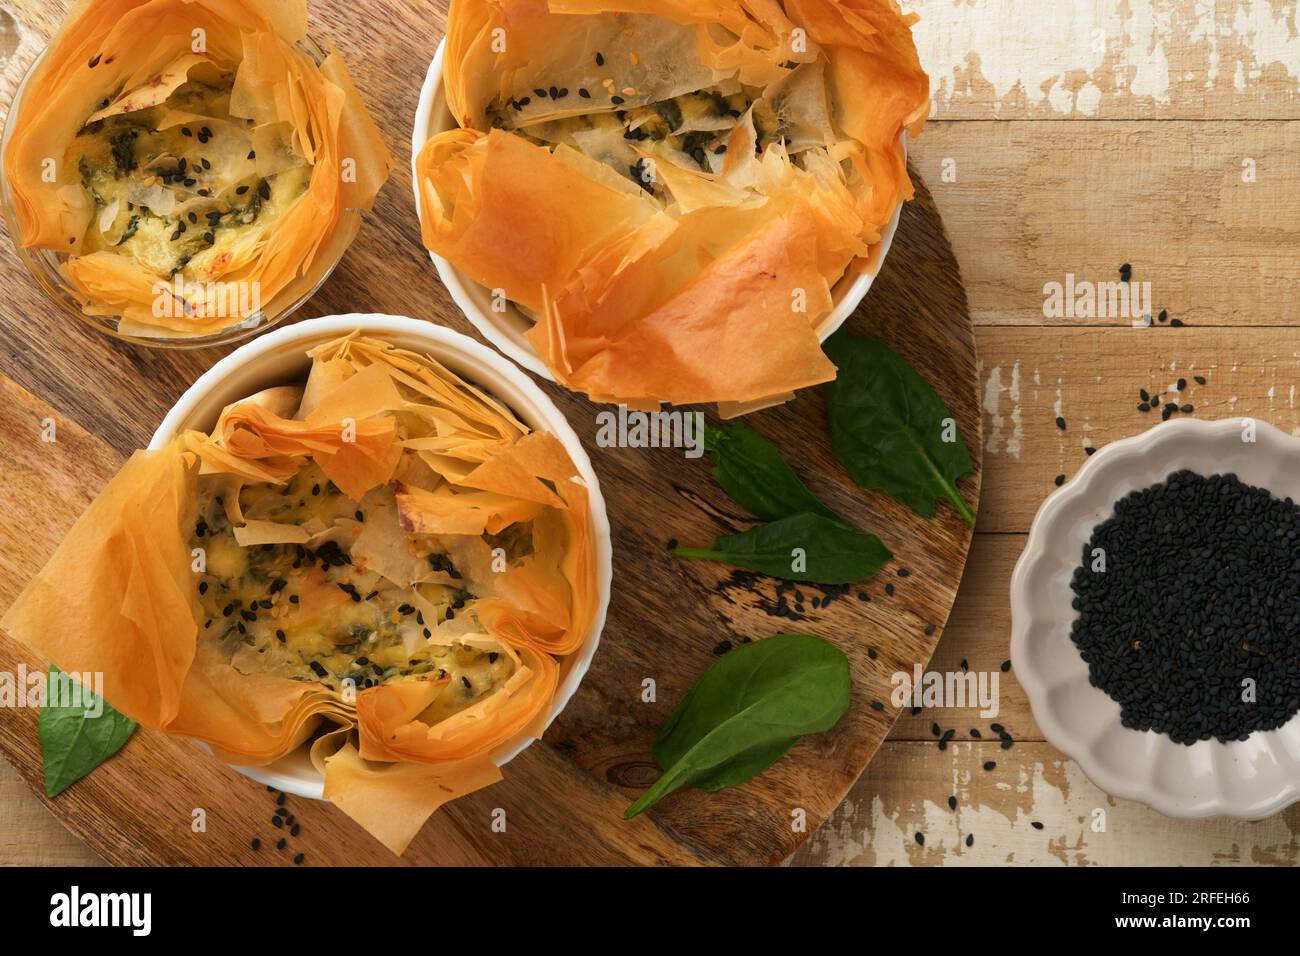 Filo pies with soft feta cheese and spinach in ceramic molds on old wooden table background. Filo portions pies. Small Baked Spanakopita pies. Top vie Stock Photo